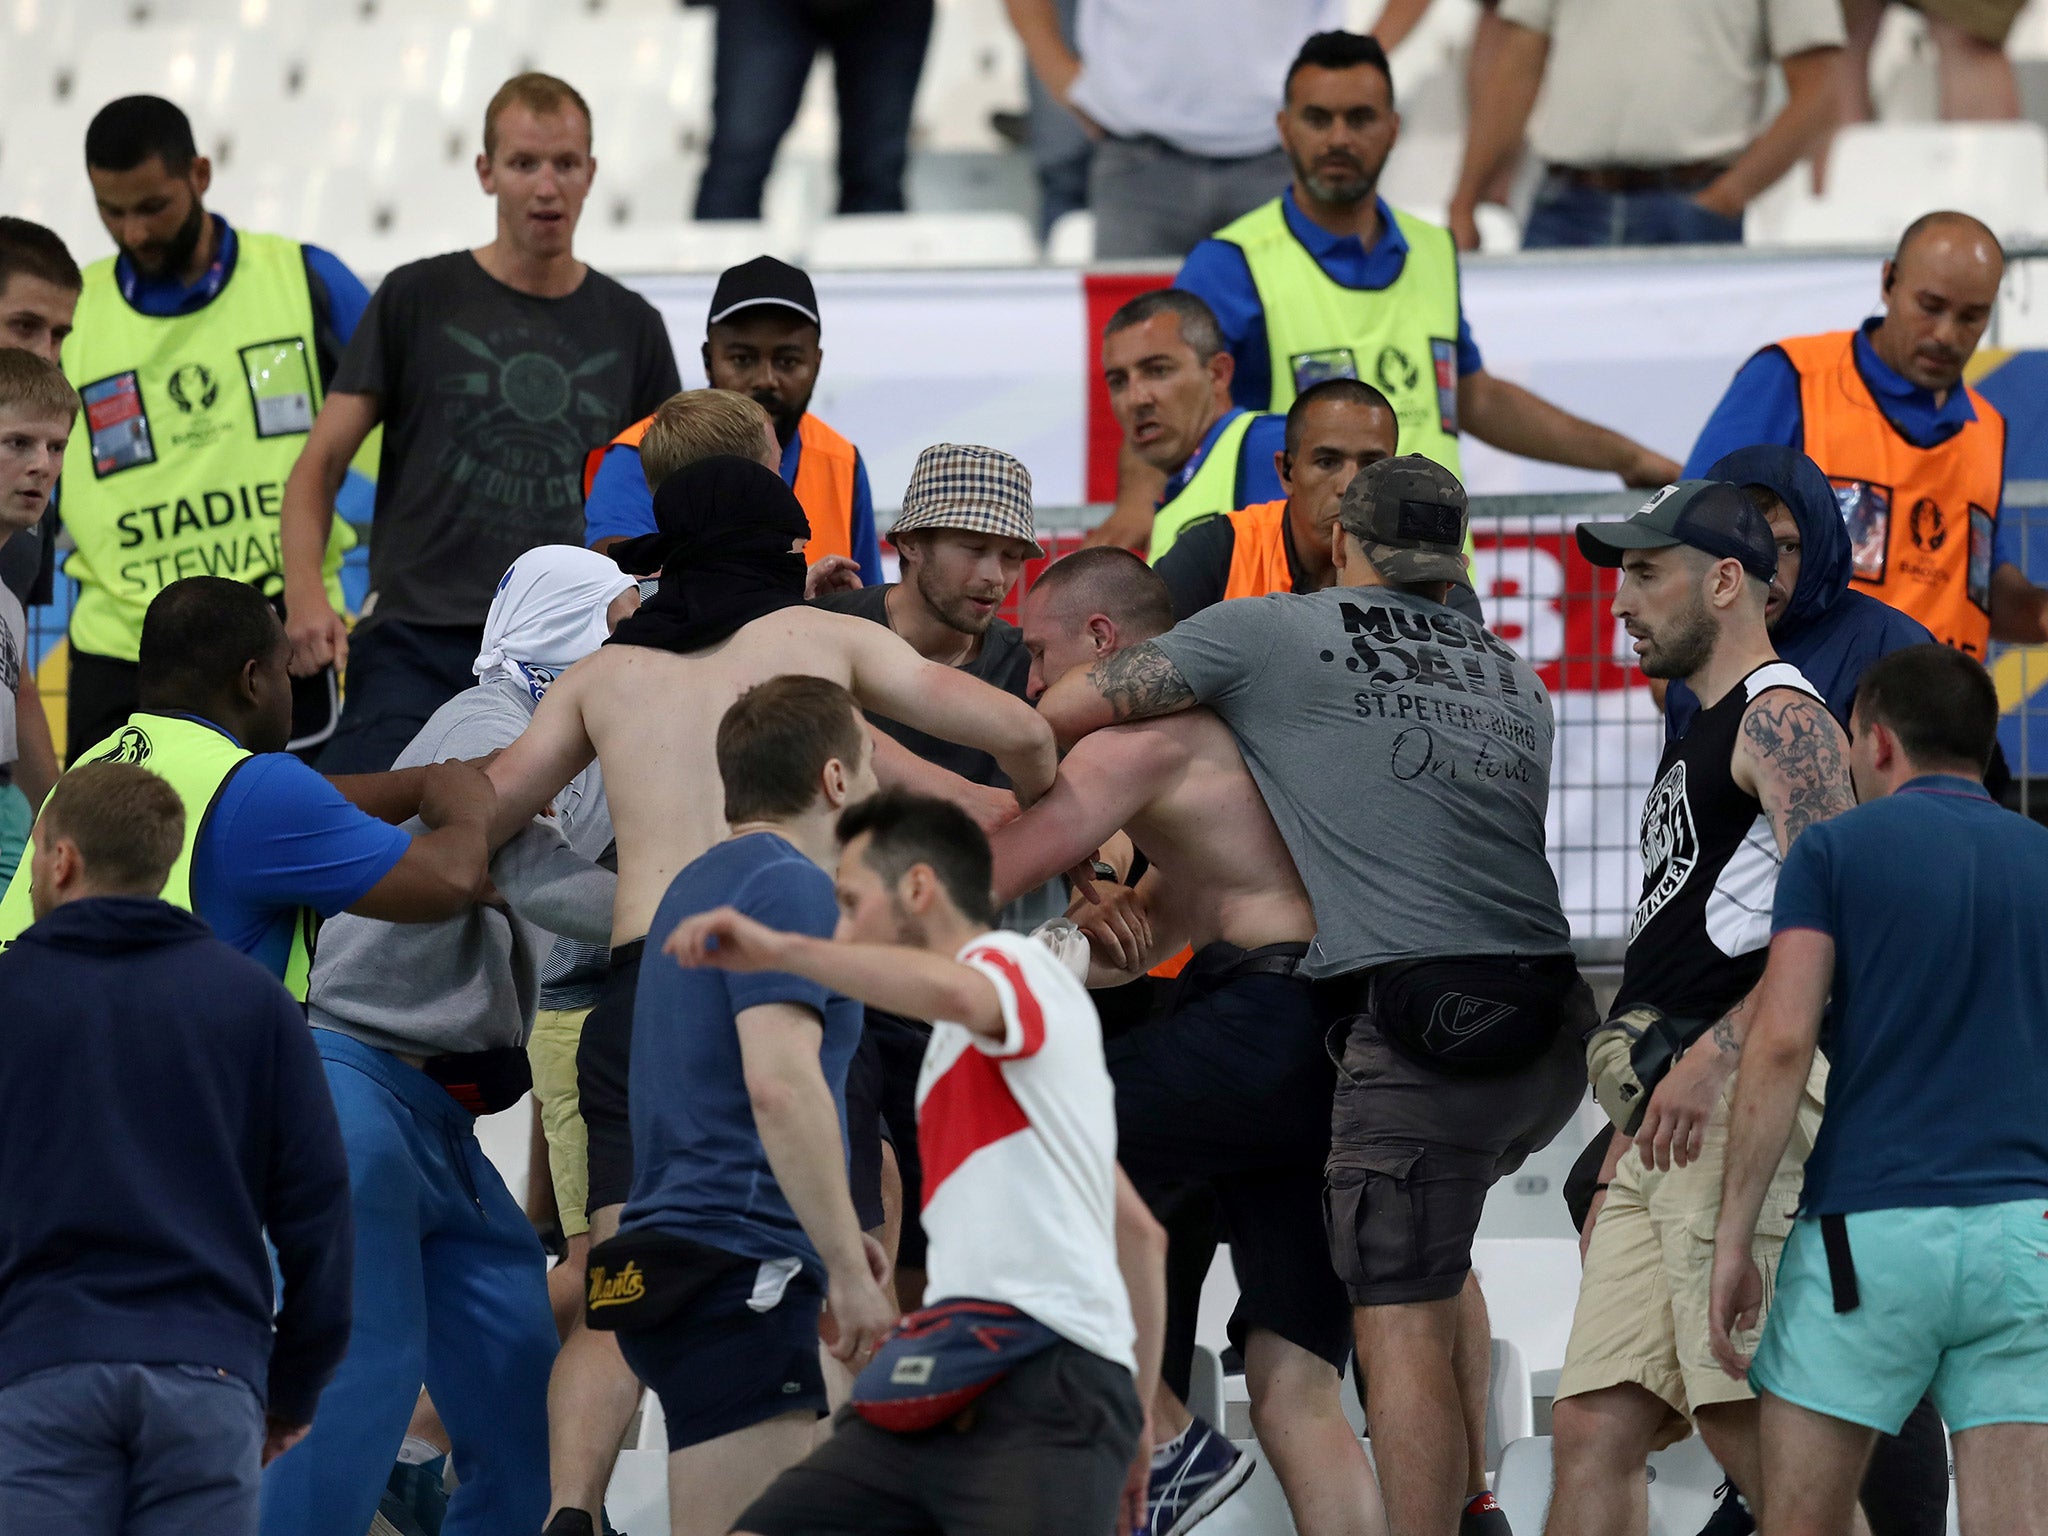 Russia and England fans clash following their 1-1 draw at the Stade Veldrome at Euro 2016